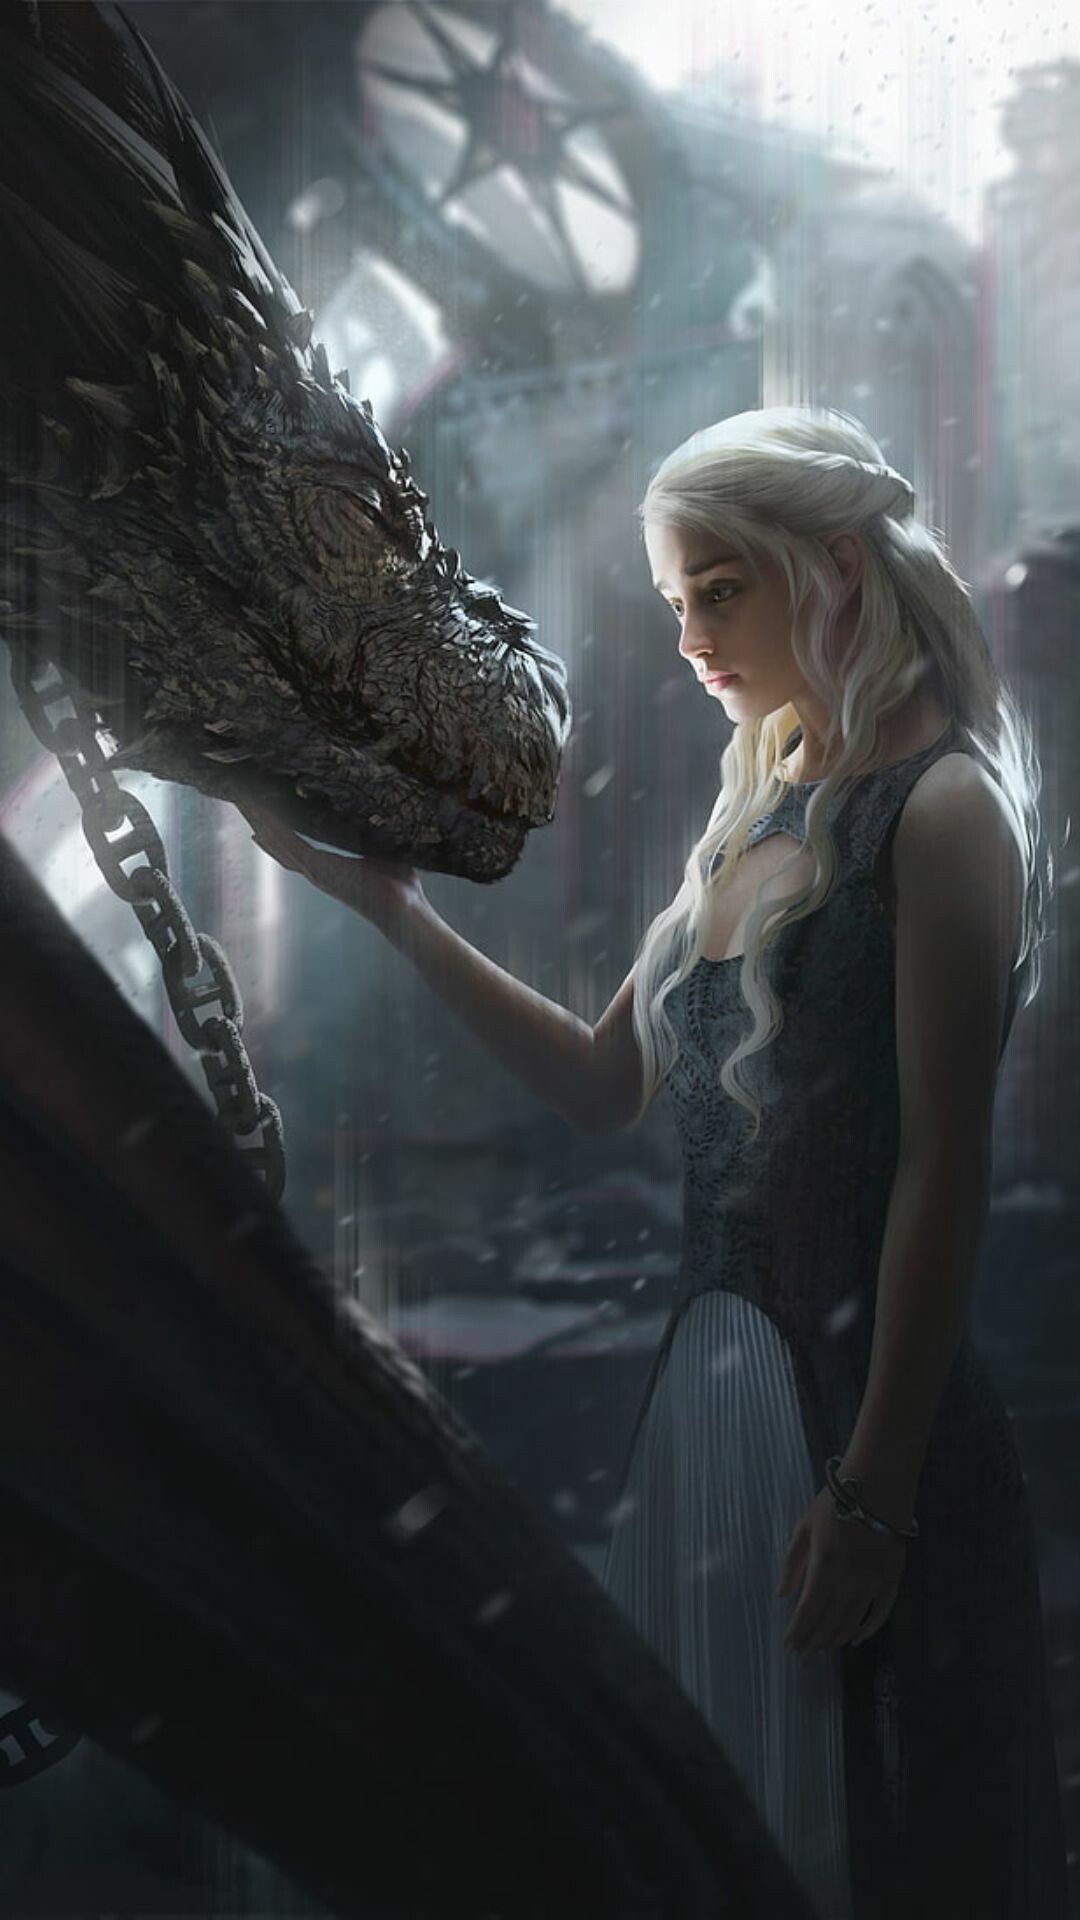 Game of Thrones: Daenerys Targaryen, Queen of the Andals, the Rhoynar and the First Men. 1080x1920 Full HD Background.